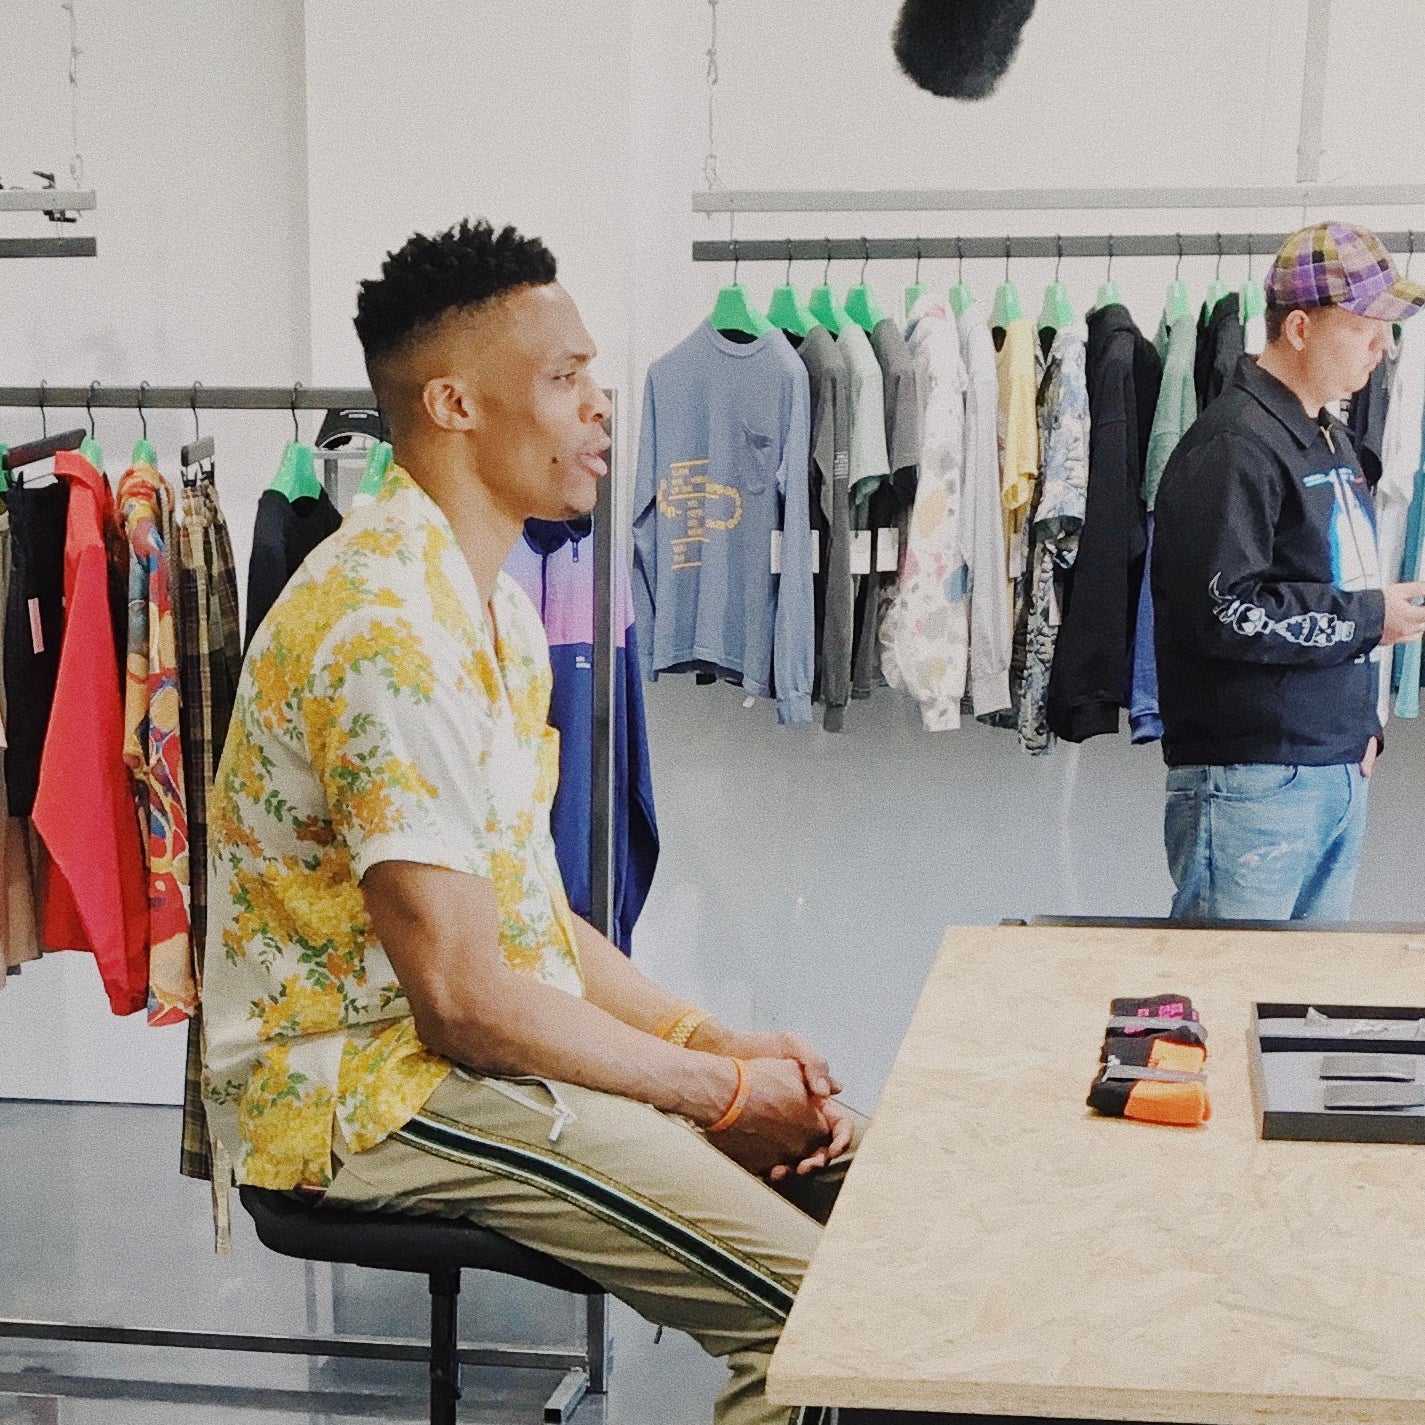 Russell Westbrook Worked at the Store For a Day